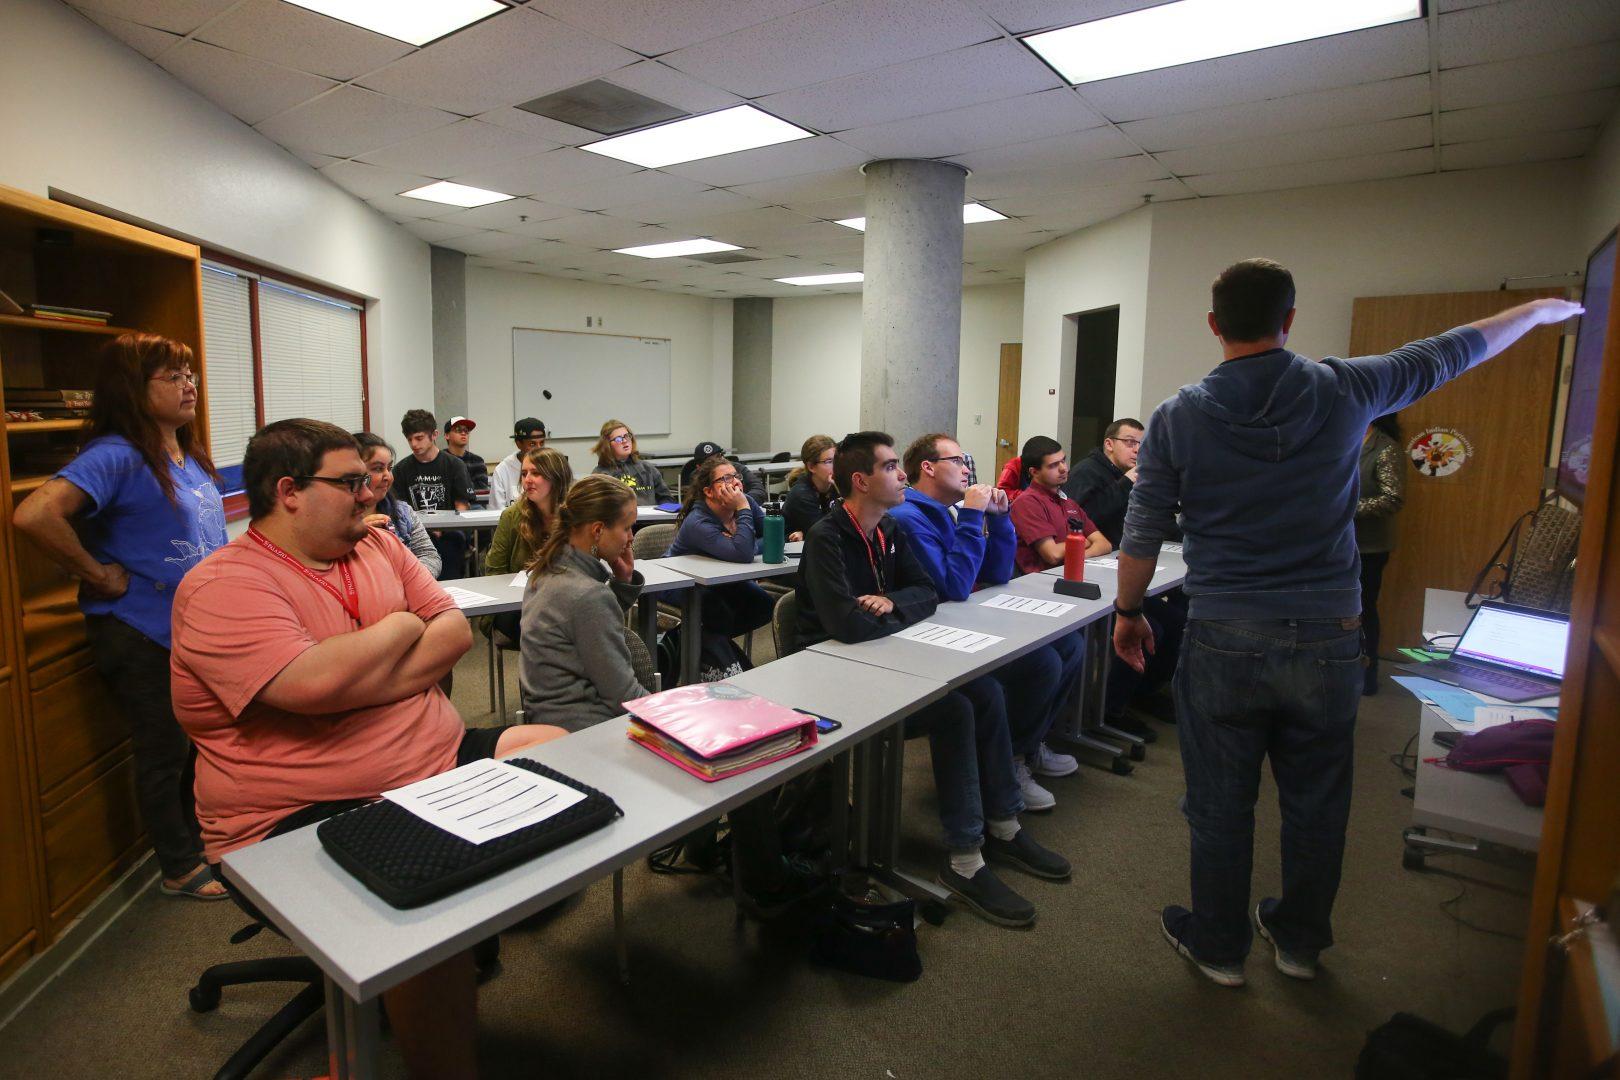 Wave finder students at the Career Development Wave Finder Workshop at Kremen Building on Tuesday, March. 3, 2020.(Armando Carreno/The Collegian)